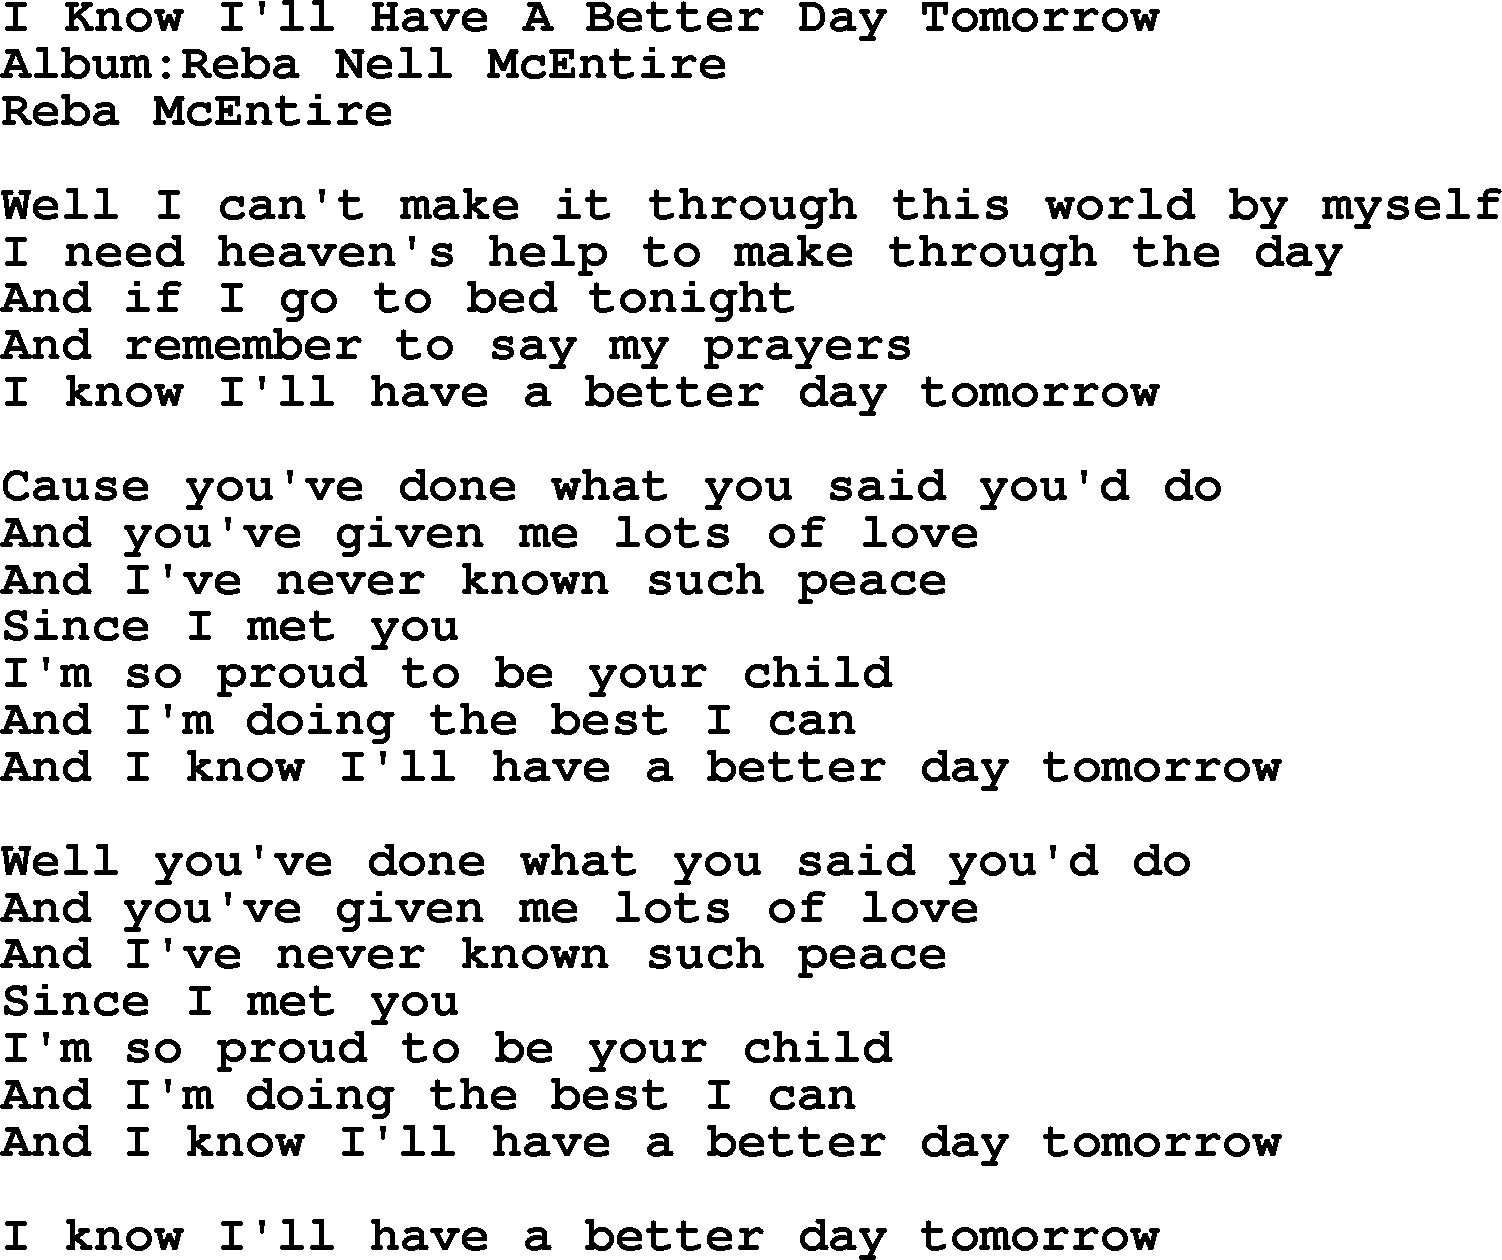 Reba McEntire song: I Know I'll Have A Better Day Tomorrow lyrics